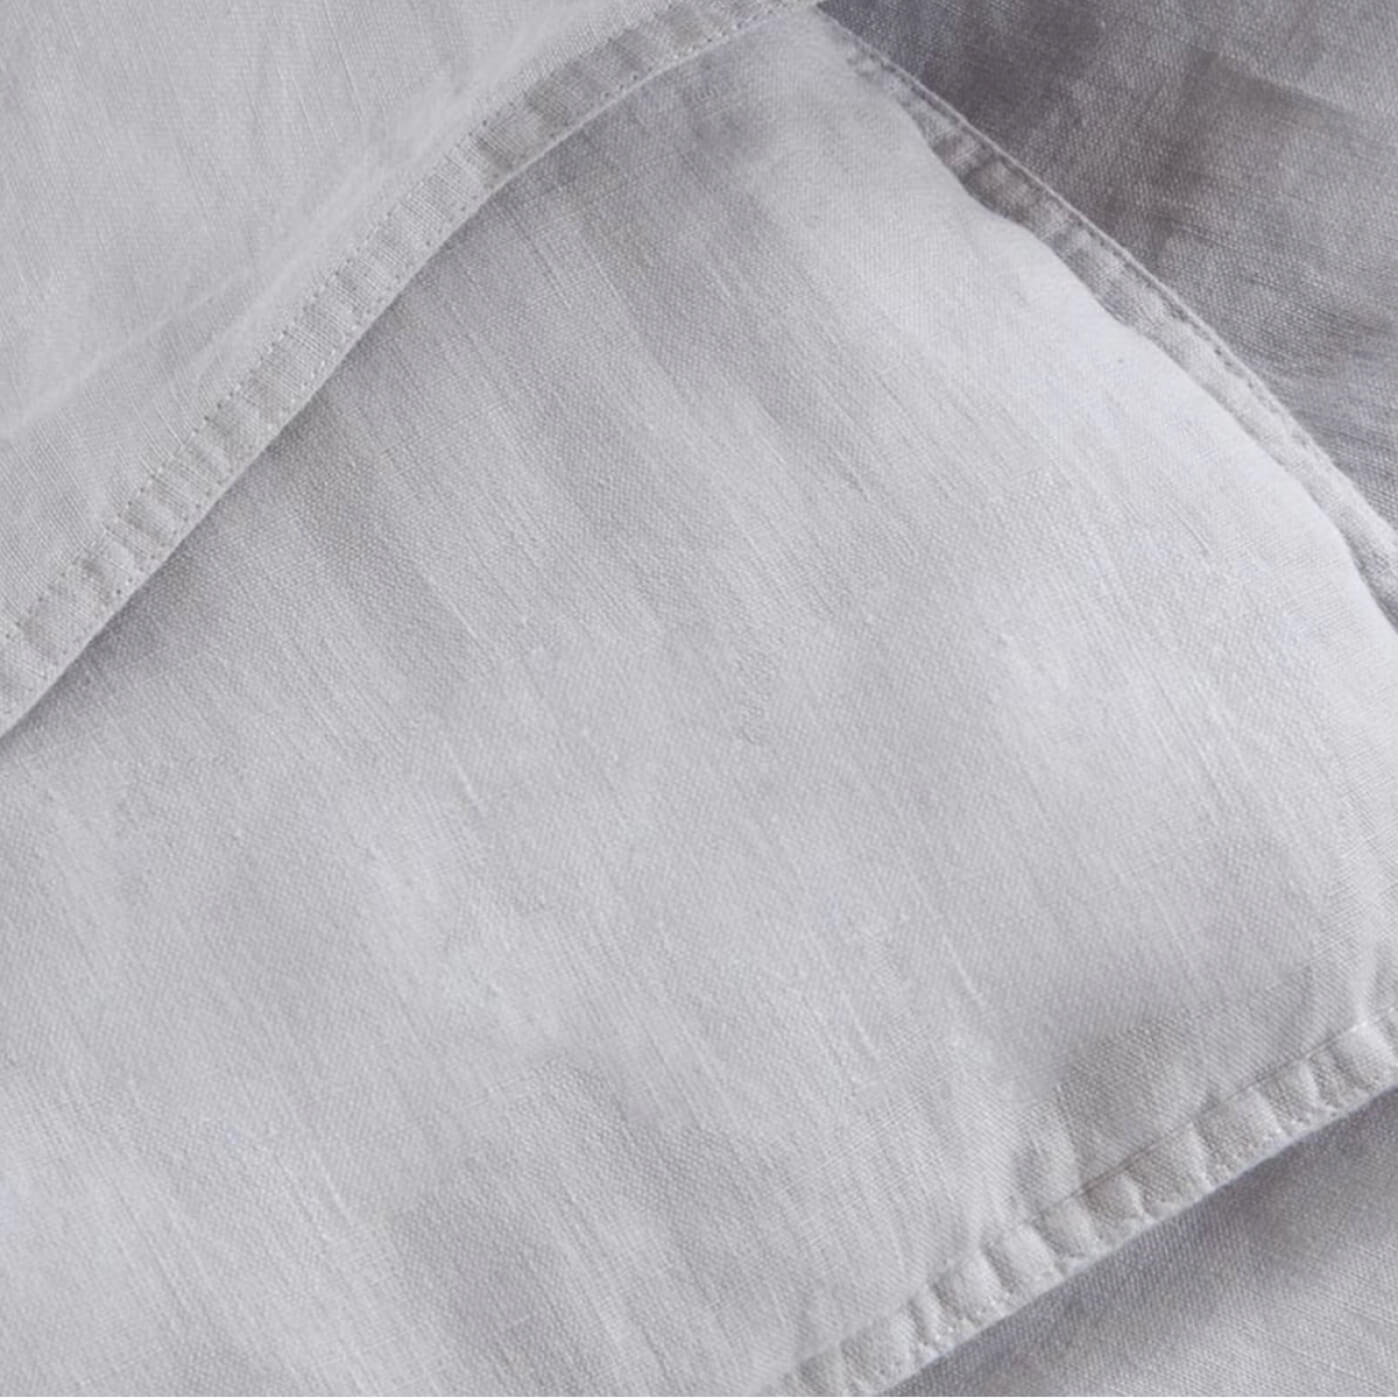 How to choose the right bedding